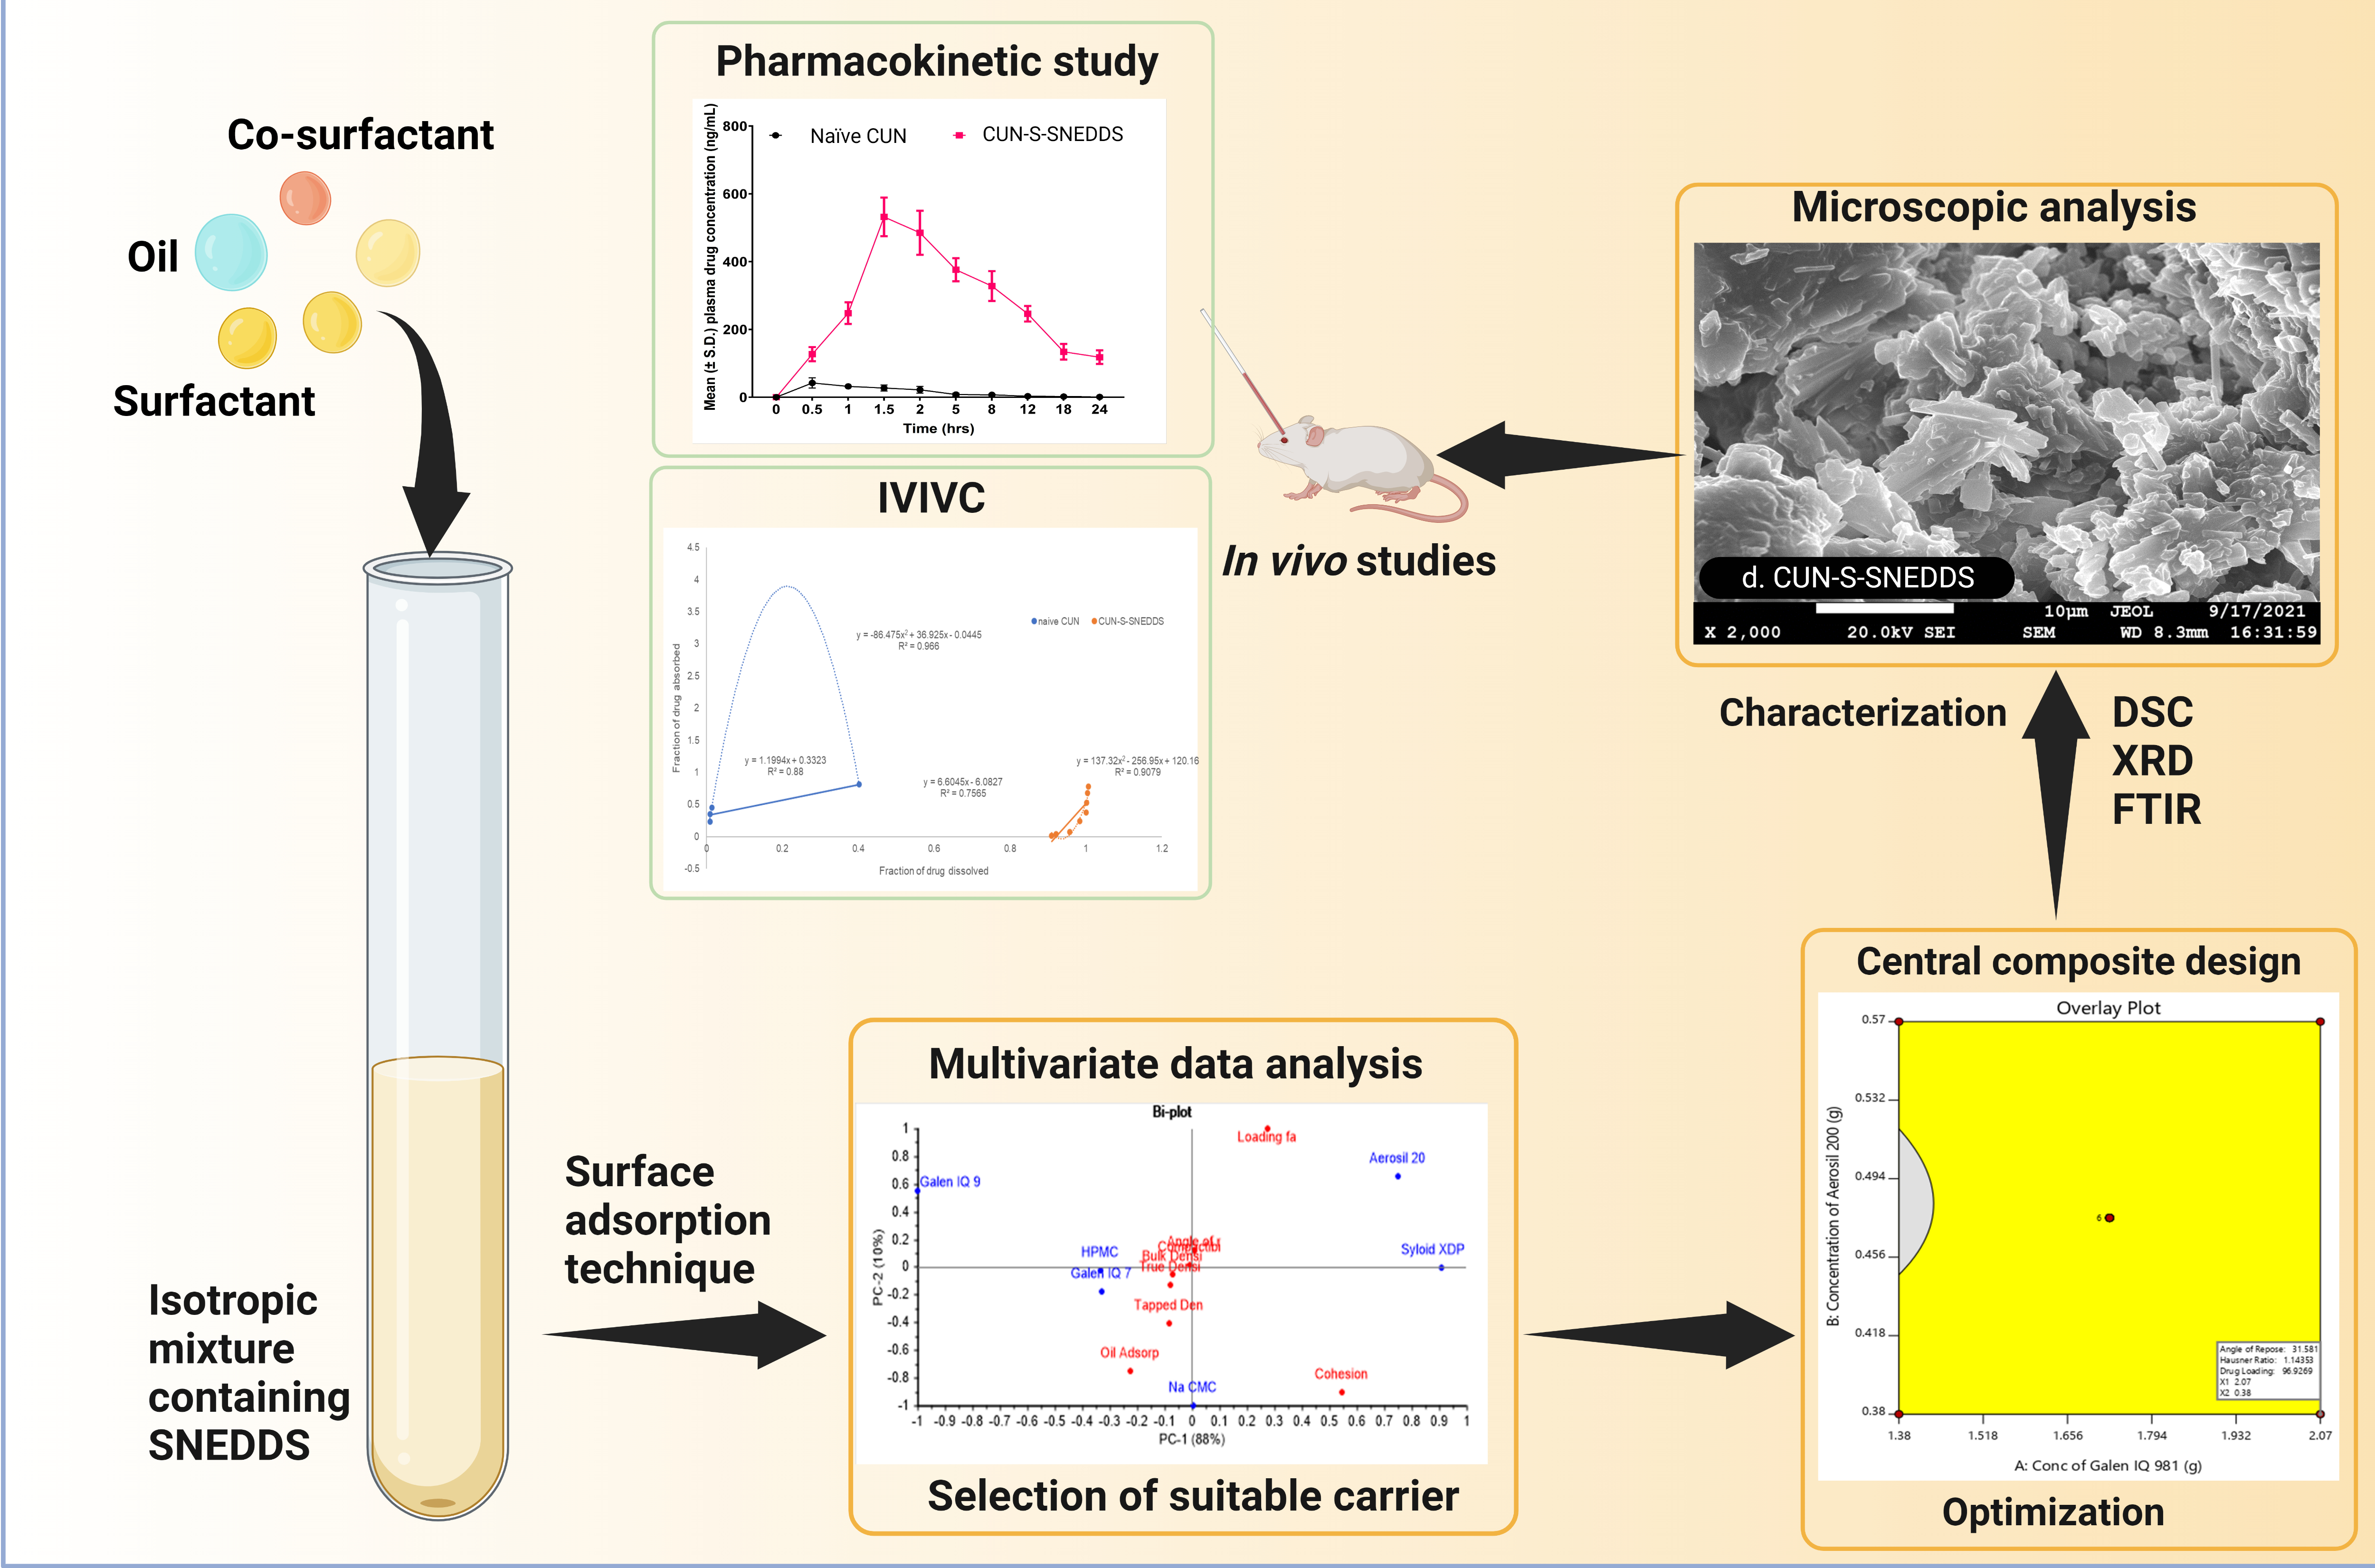 Multivariate Data Analysis and Central Composite Design-Oriented Optimization of Solid Carriers for Formulation of Curcumin-Loaded Solid SNEDDS_Dissolution and Bioavailability Assessment